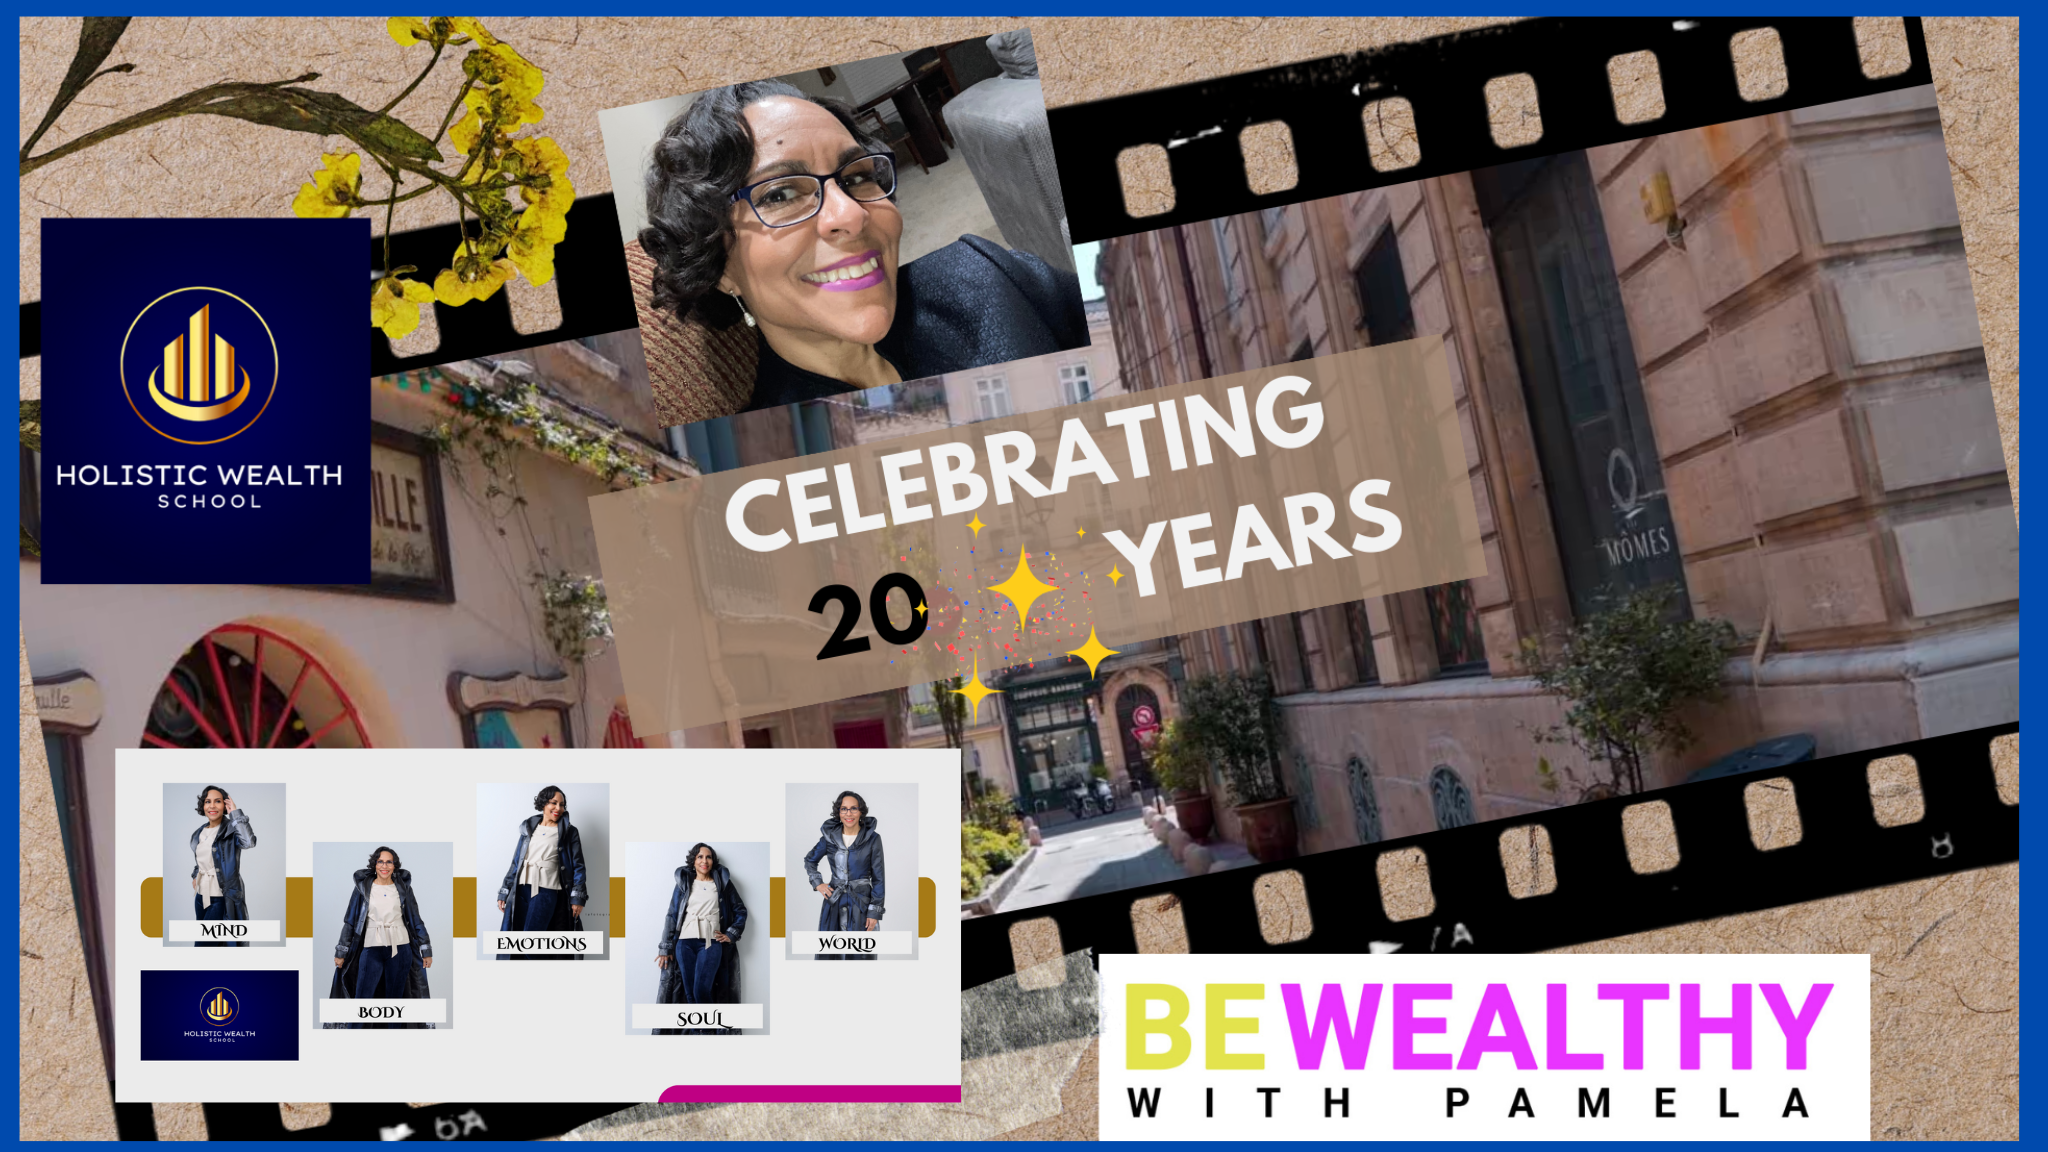 Our Holistic Wealth Hustle podcast features reflections of our top 20 lessons as we celebrate 20 years!